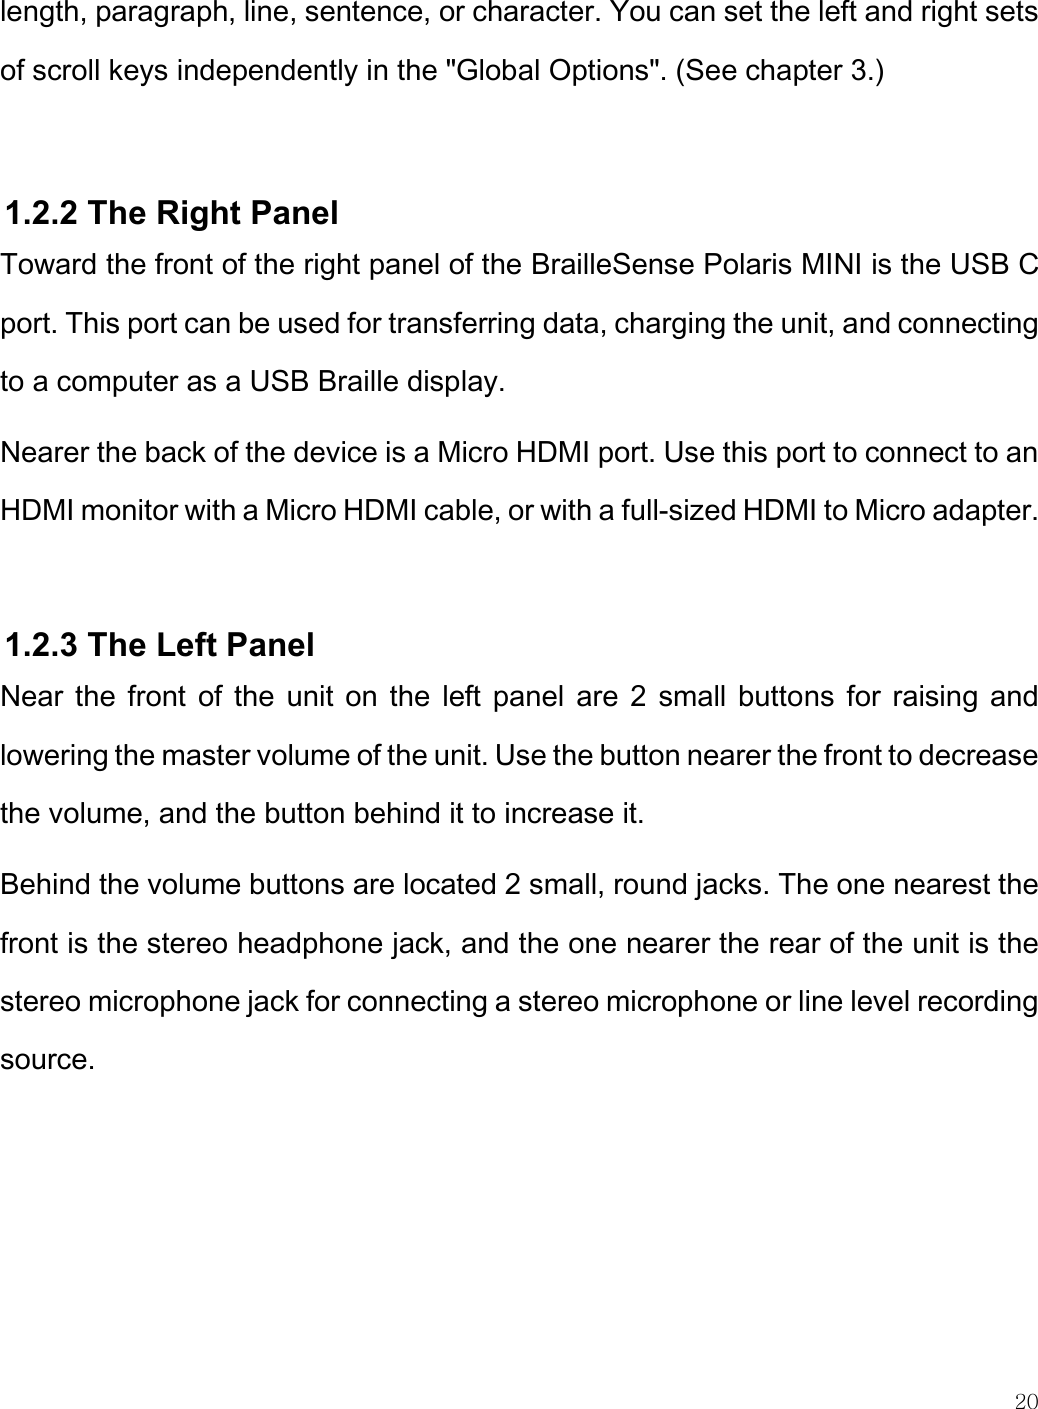    20  length, paragraph, line, sentence, or character. You can set the left and right sets of scroll keys independently in the &quot;Global Options&quot;. (See chapter 3.)   1.2.2 The Right Panel Toward the front of the right panel of the BrailleSense Polaris MINI is the USB C port. This port can be used for transferring data, charging the unit, and connecting to a computer as a USB Braille display.  Nearer the back of the device is a Micro HDMI port. Use this port to connect to an HDMI monitor with a Micro HDMI cable, or with a full-sized HDMI to Micro adapter.   1.2.3 The Left Panel Near the front of the unit on the left panel  are 2 small buttons for raising and lowering the master volume of the unit. Use the button nearer the front to decrease the volume, and the button behind it to increase it. Behind the volume buttons are located 2 small, round jacks. The one nearest the front is the stereo headphone jack, and the one nearer the rear of the unit is the stereo microphone jack for connecting a stereo microphone or line level recording source.   